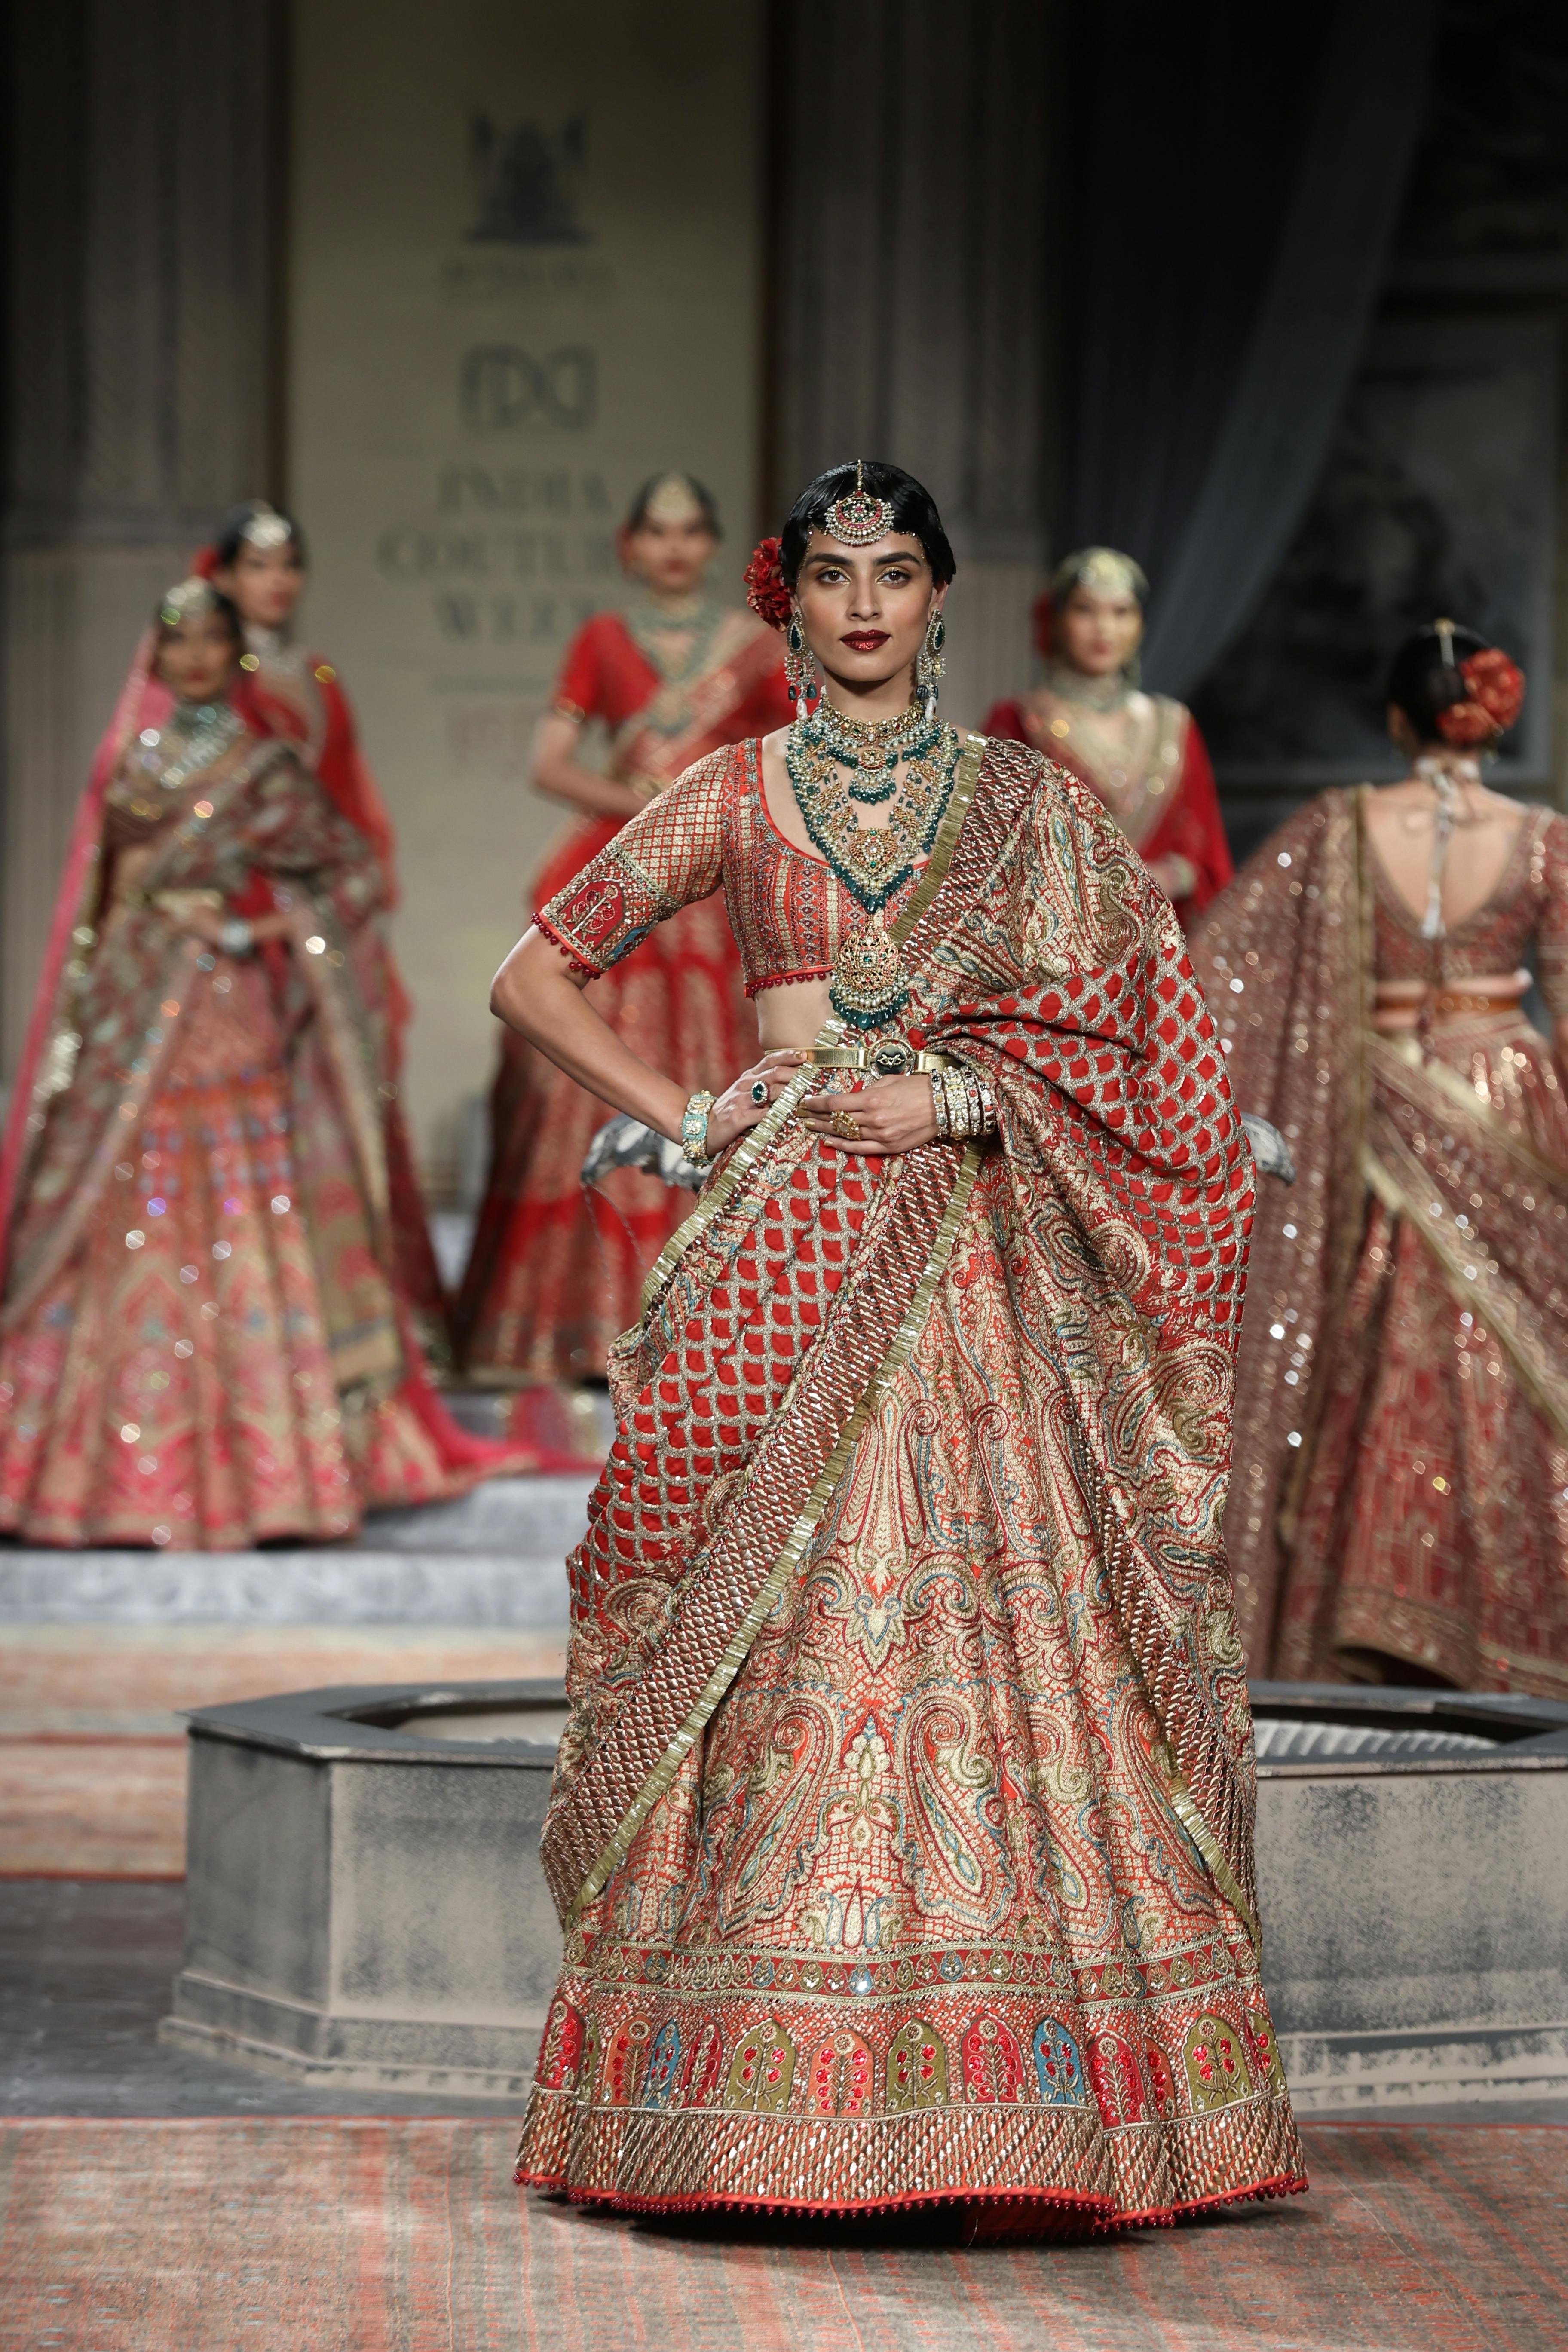 Ethnic meets eclectic at Lakme Fashion Week – in pictures